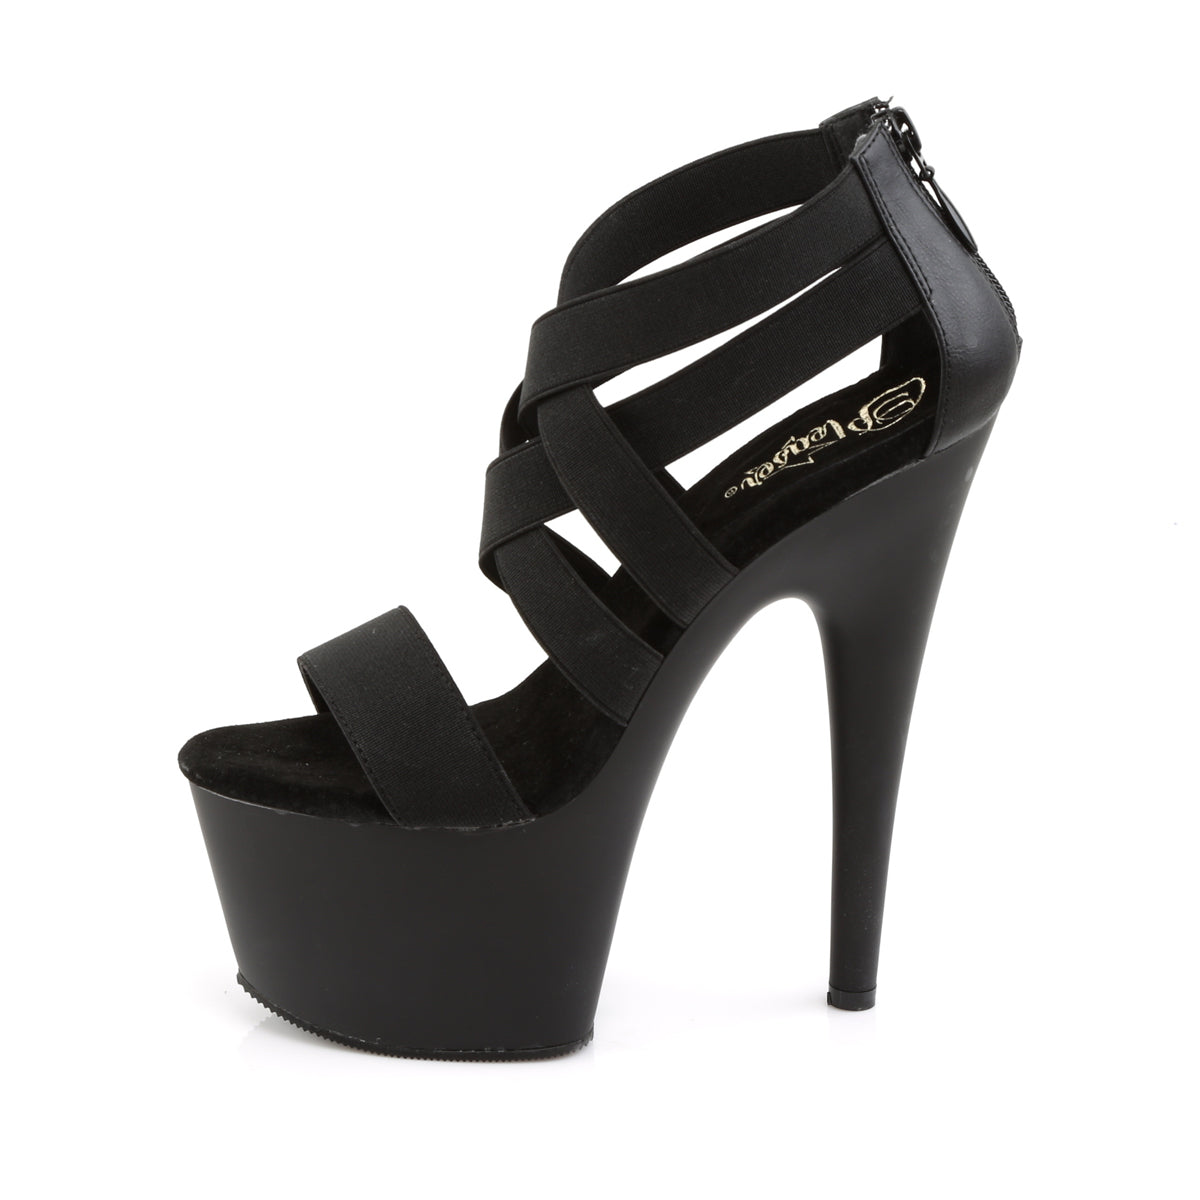 ADORE-769 Pleaser Sexy 7 Inch Heel Black Strippers Sandals-Pleaser- Sexy Shoes Pole Dance Heels